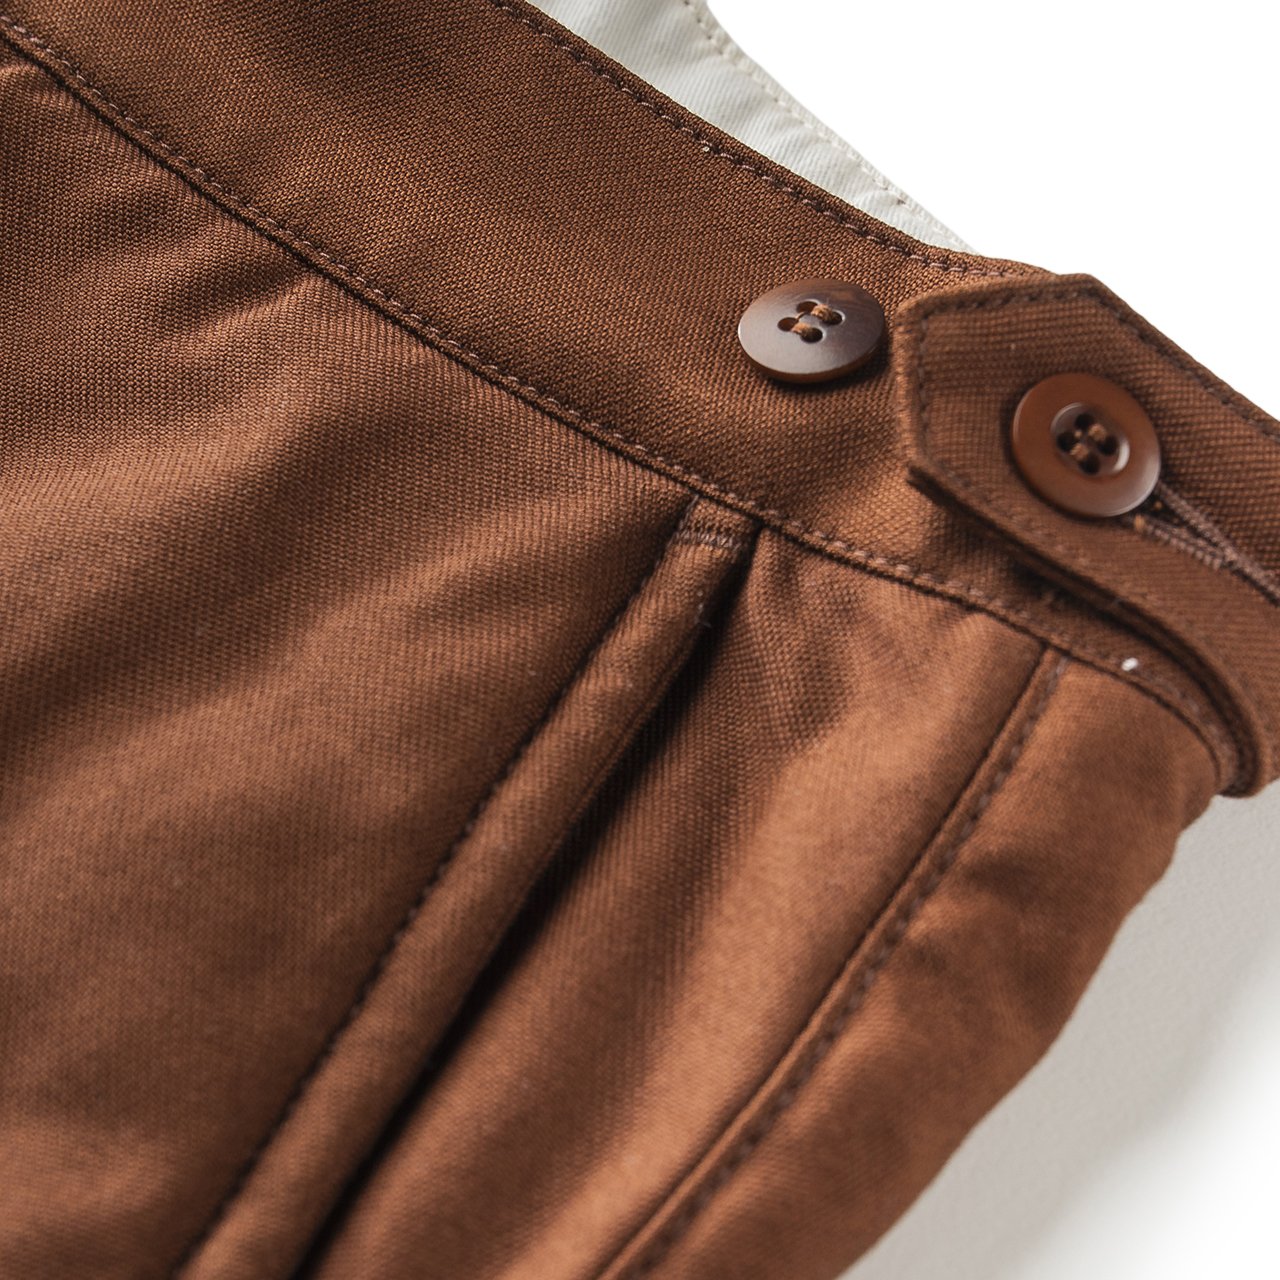 undercover undercover straight leg pants (brown)